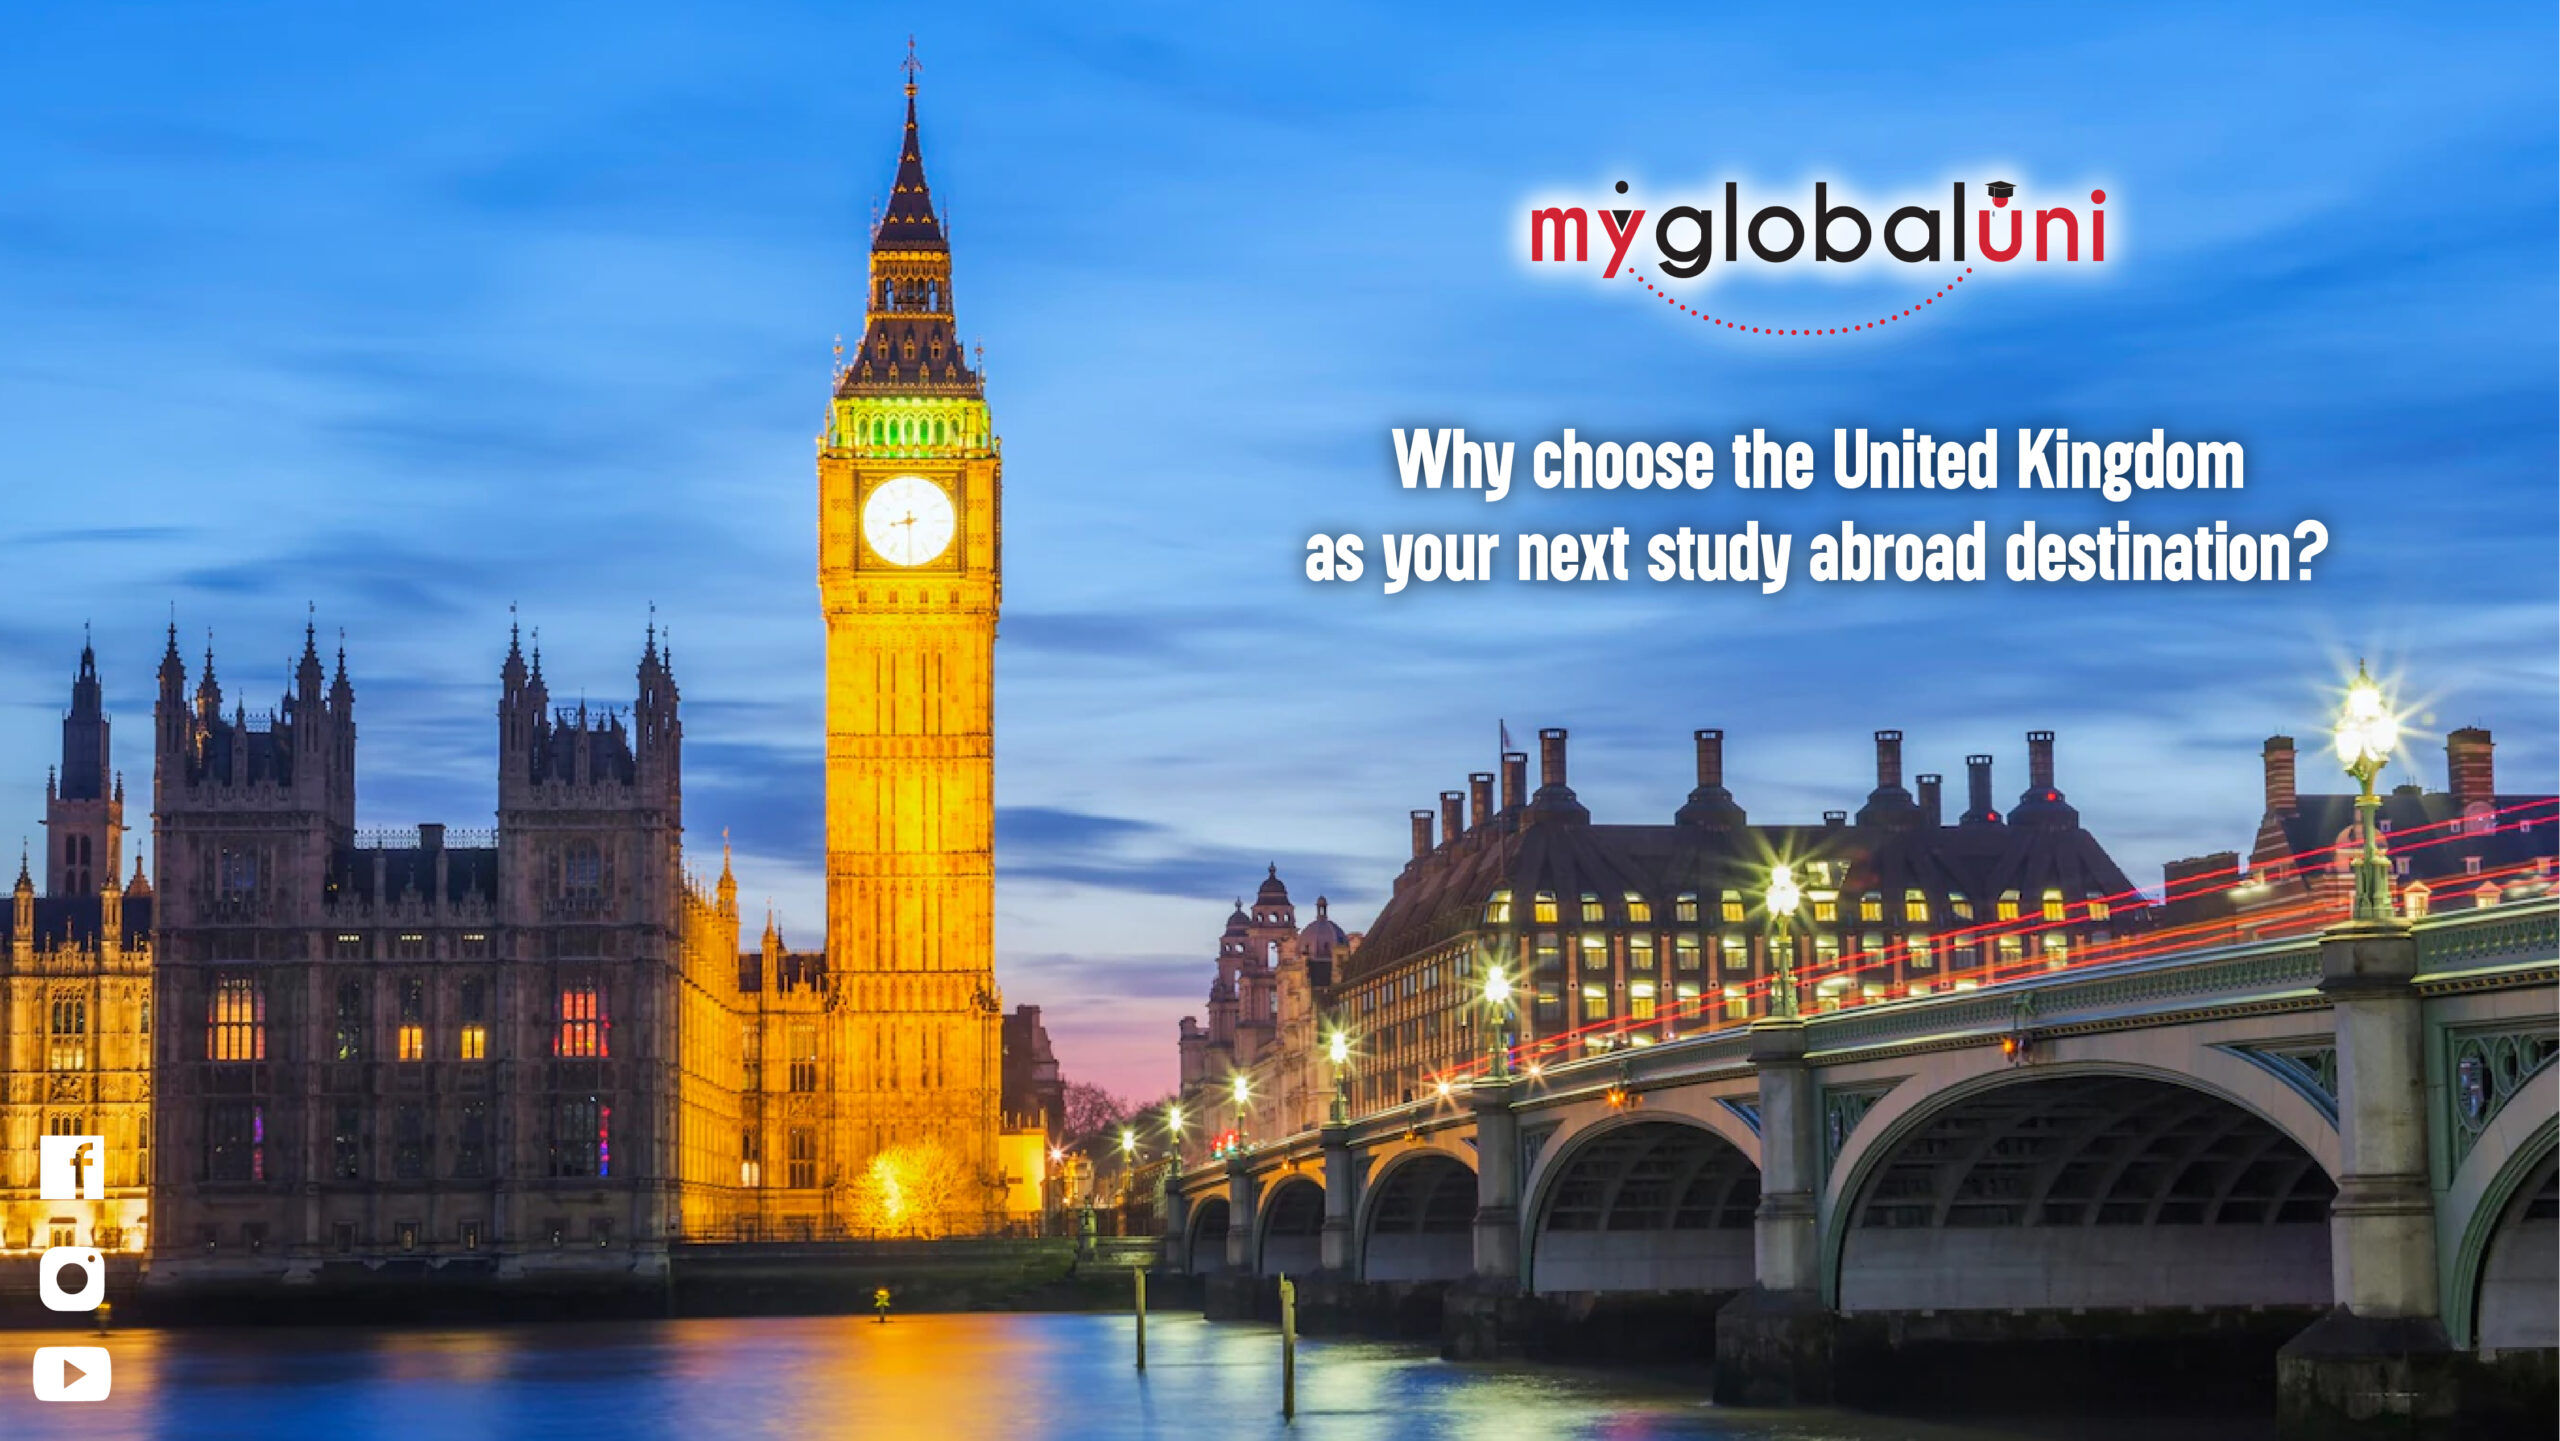 Why is the United Kingdom a favorable study abroad destination among international students?